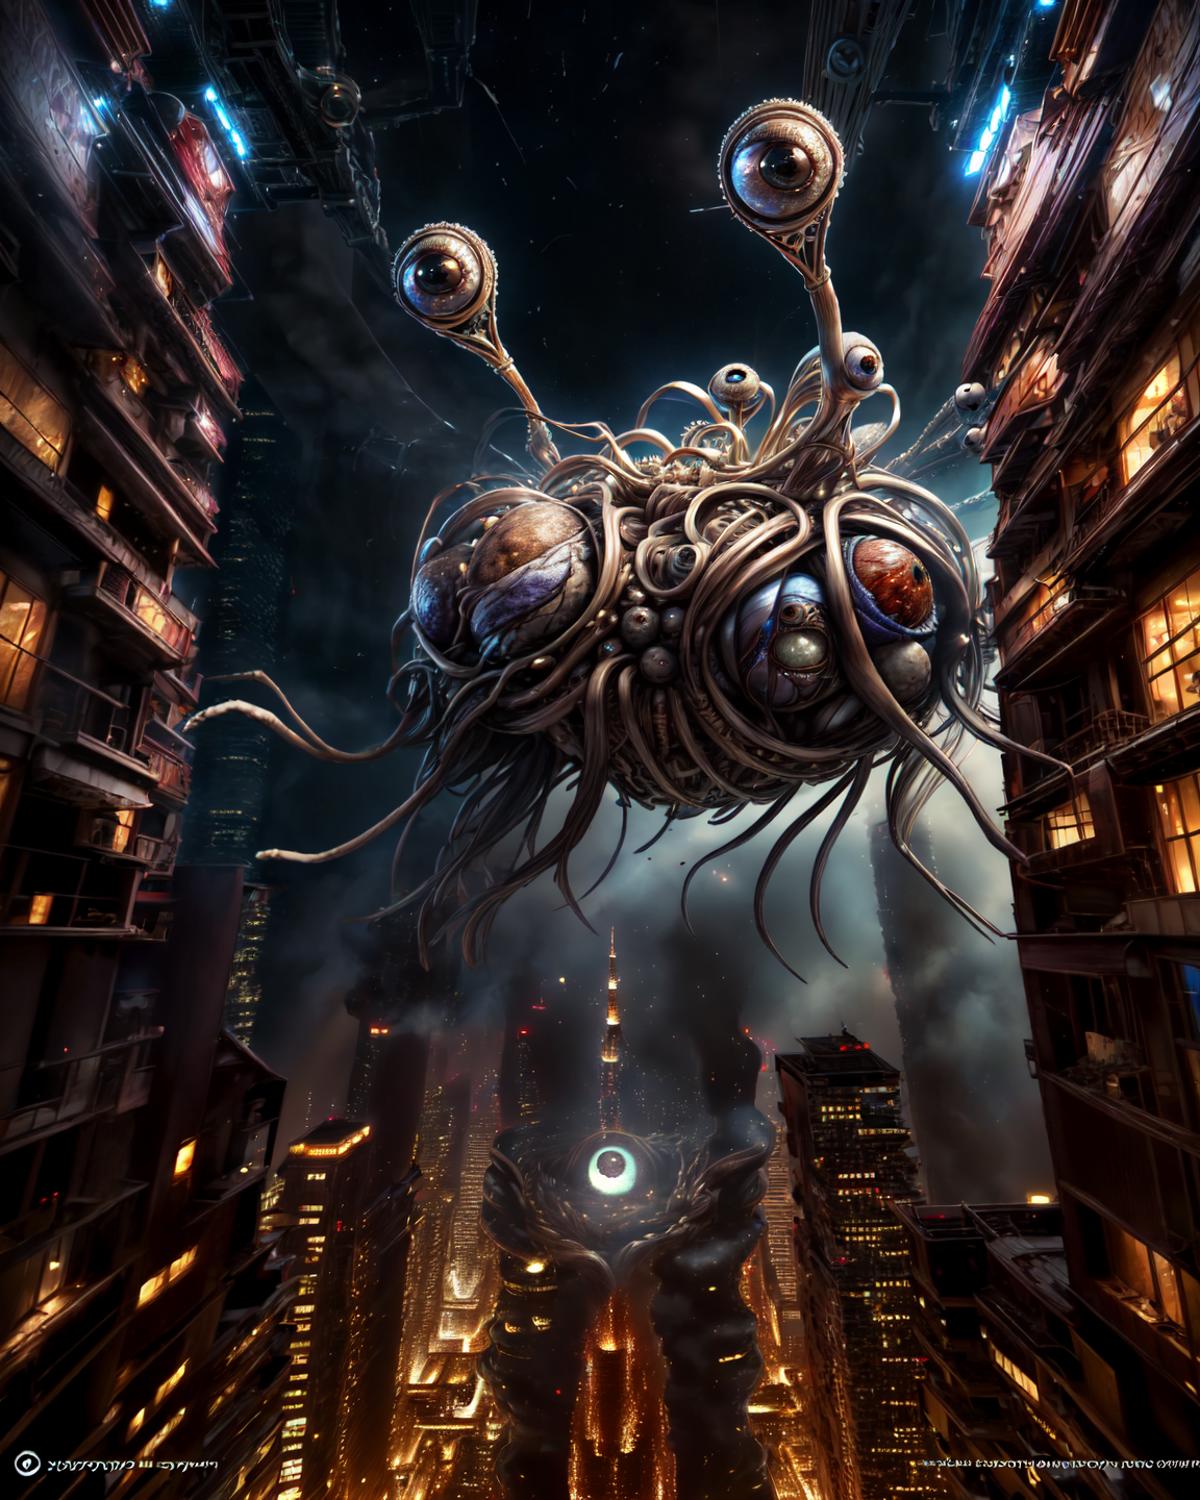 Flying Spaghetti Monster image by robotfromspace